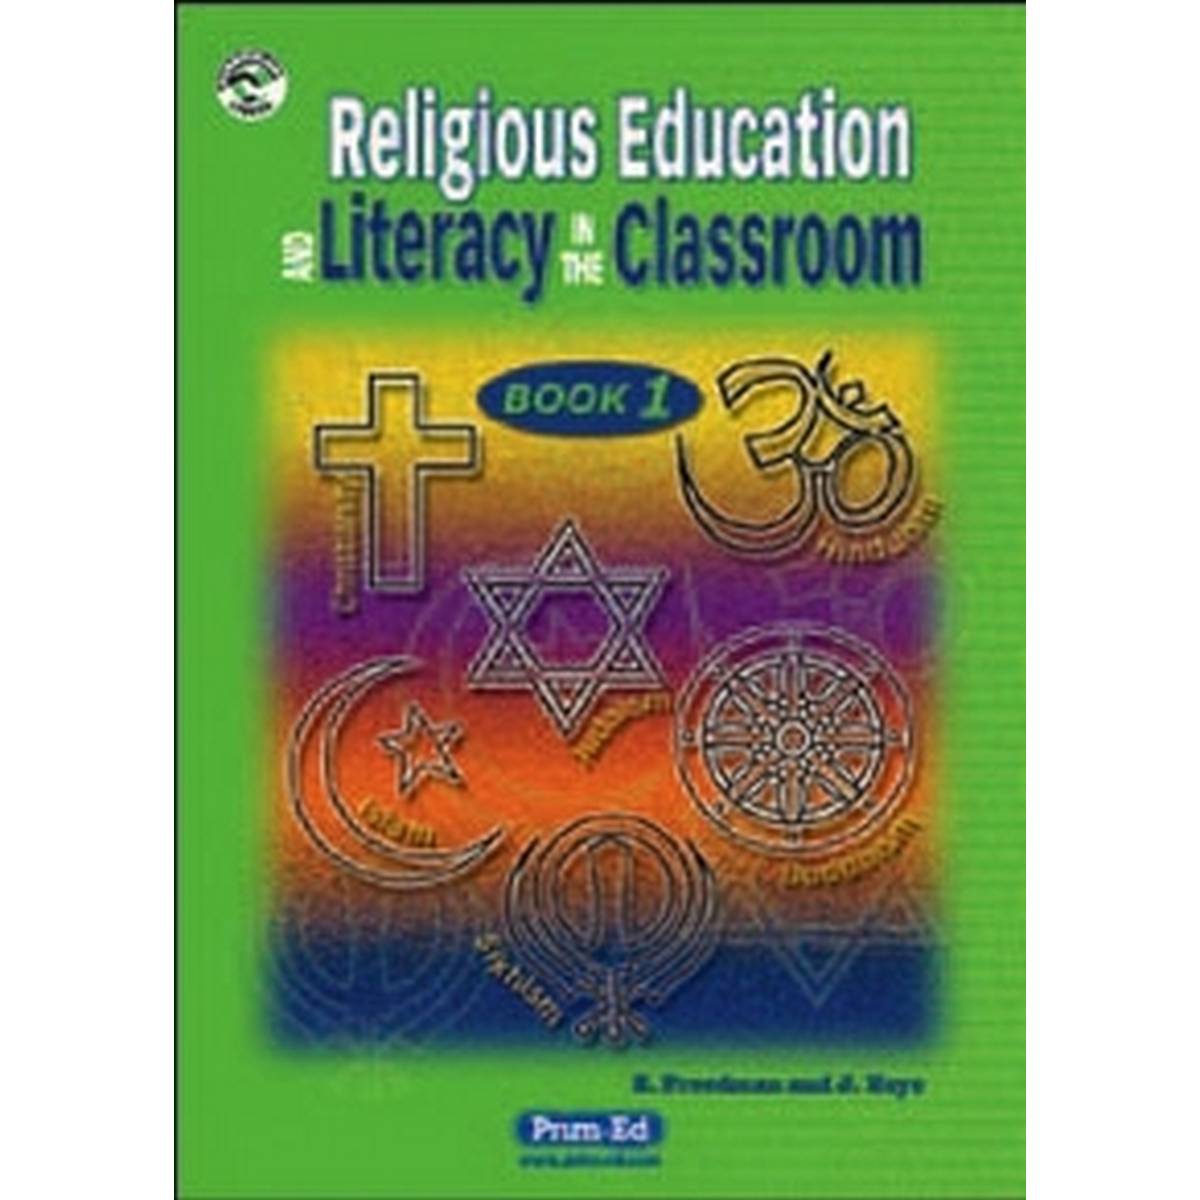 RE and Literacy in the Classroom Book 1